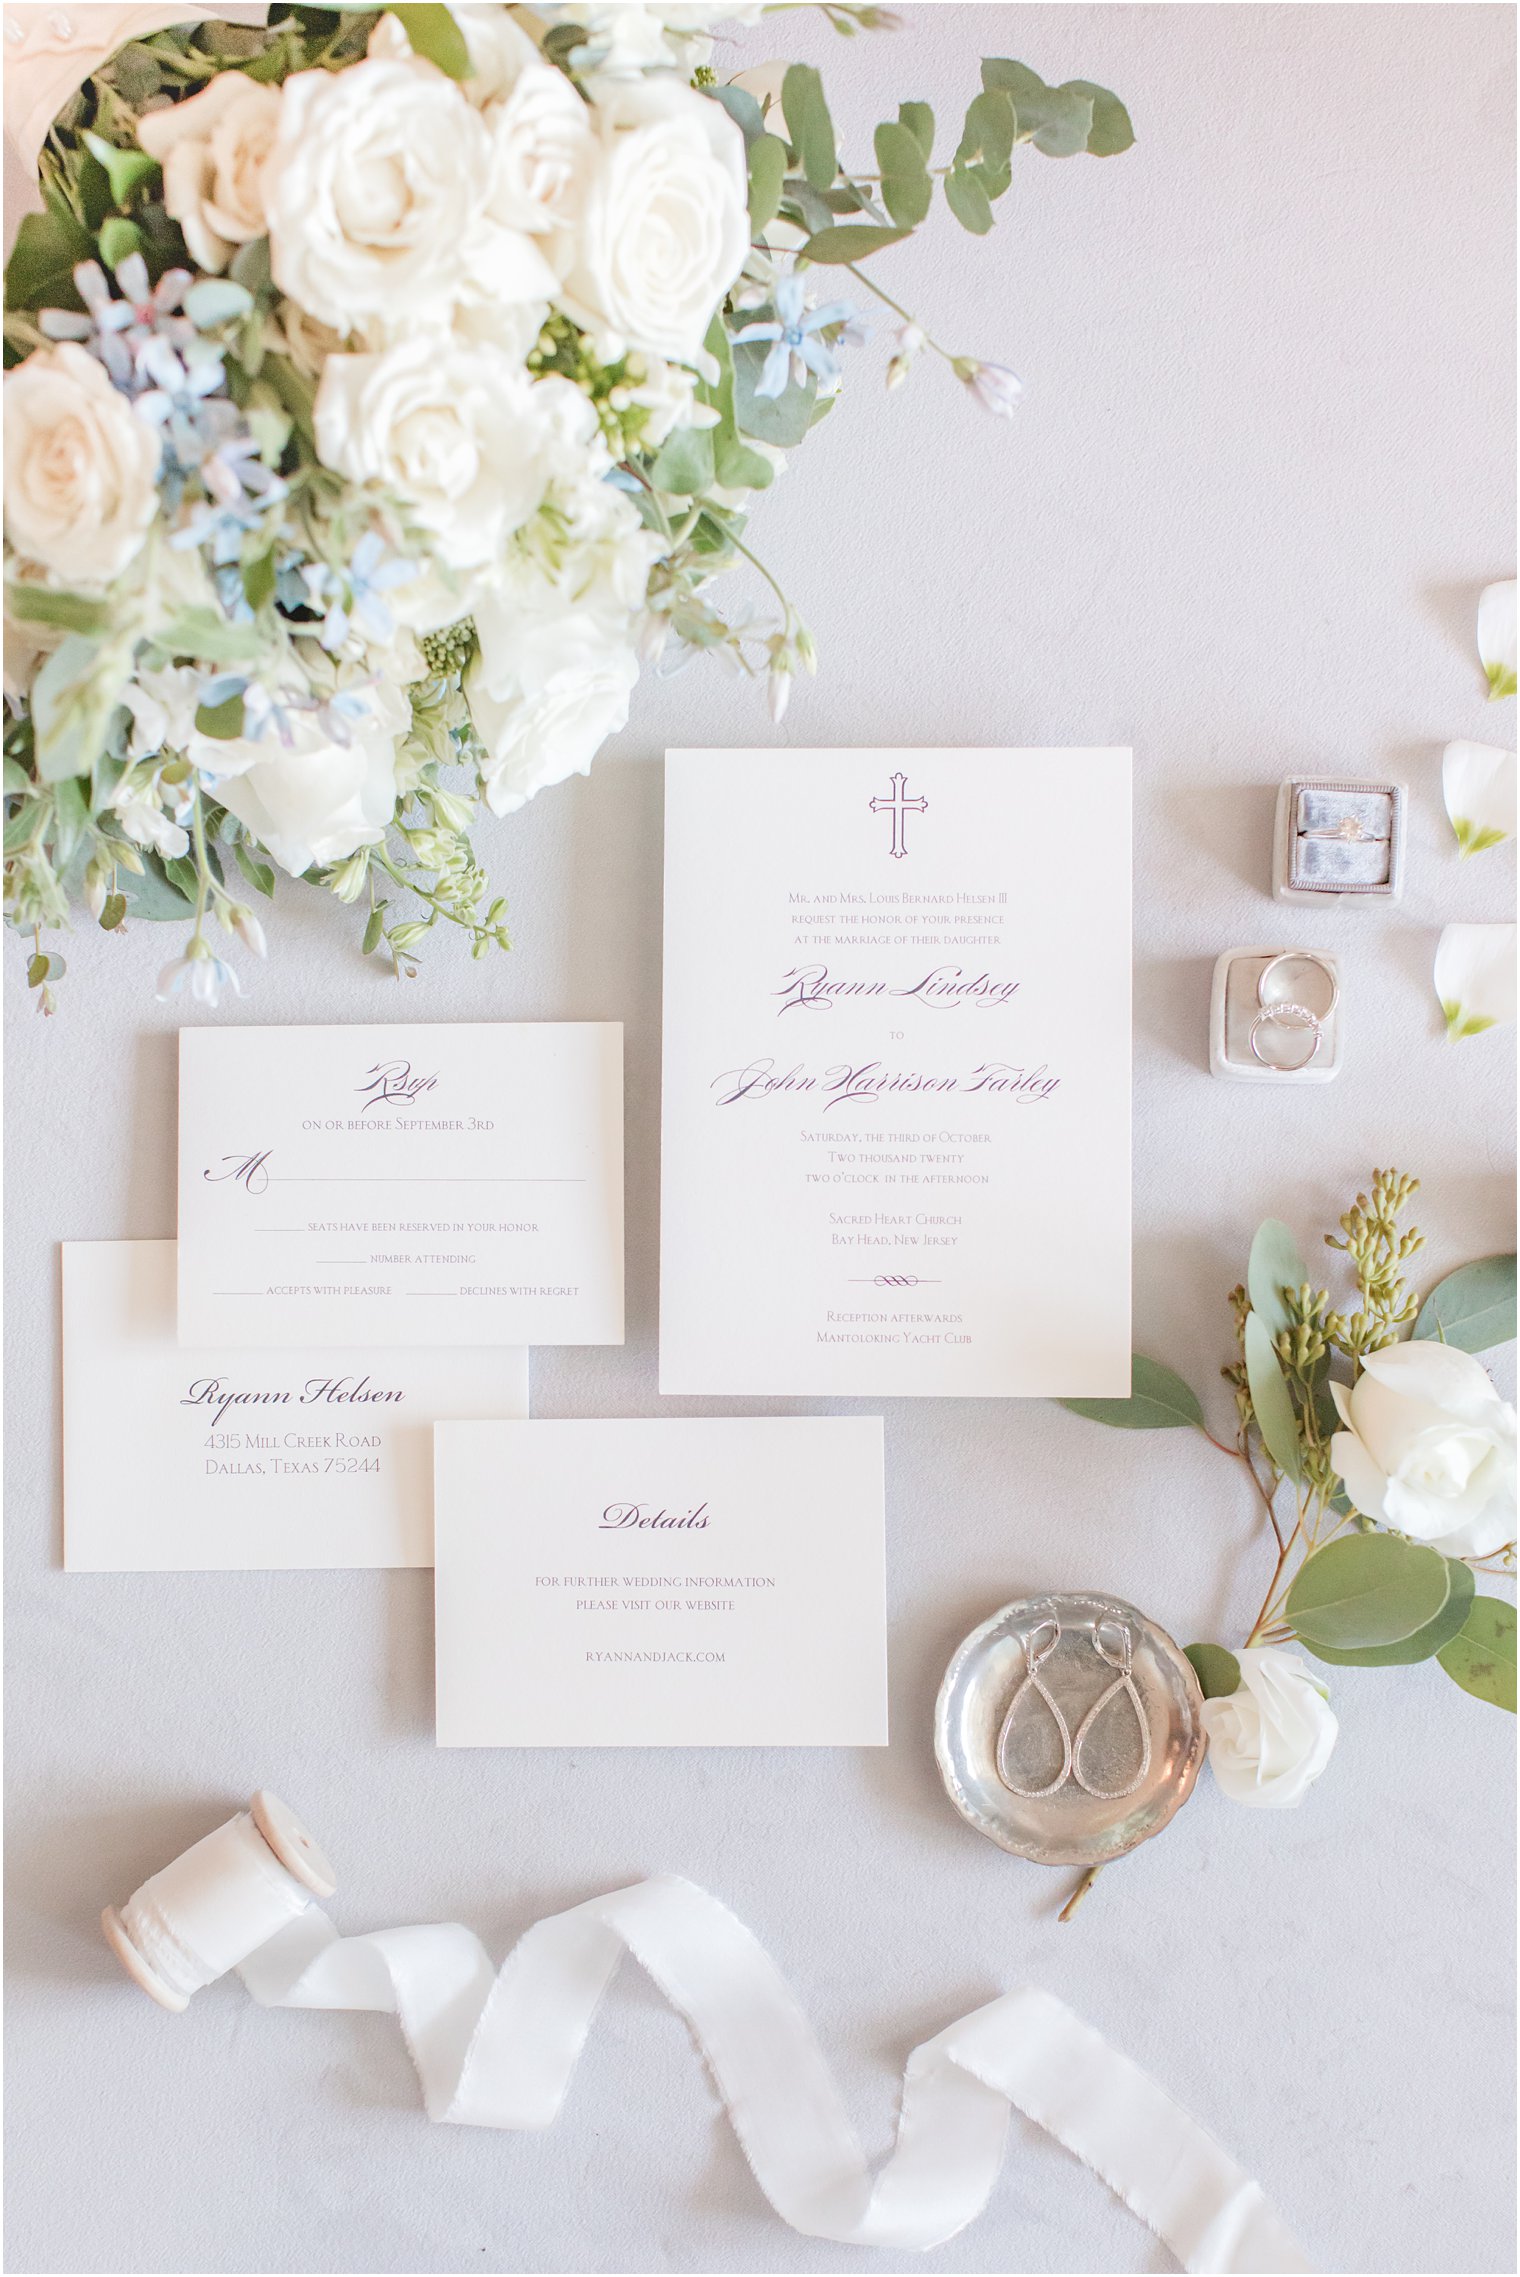 classic invitation suite for Mantoloking Yacht Club wedding